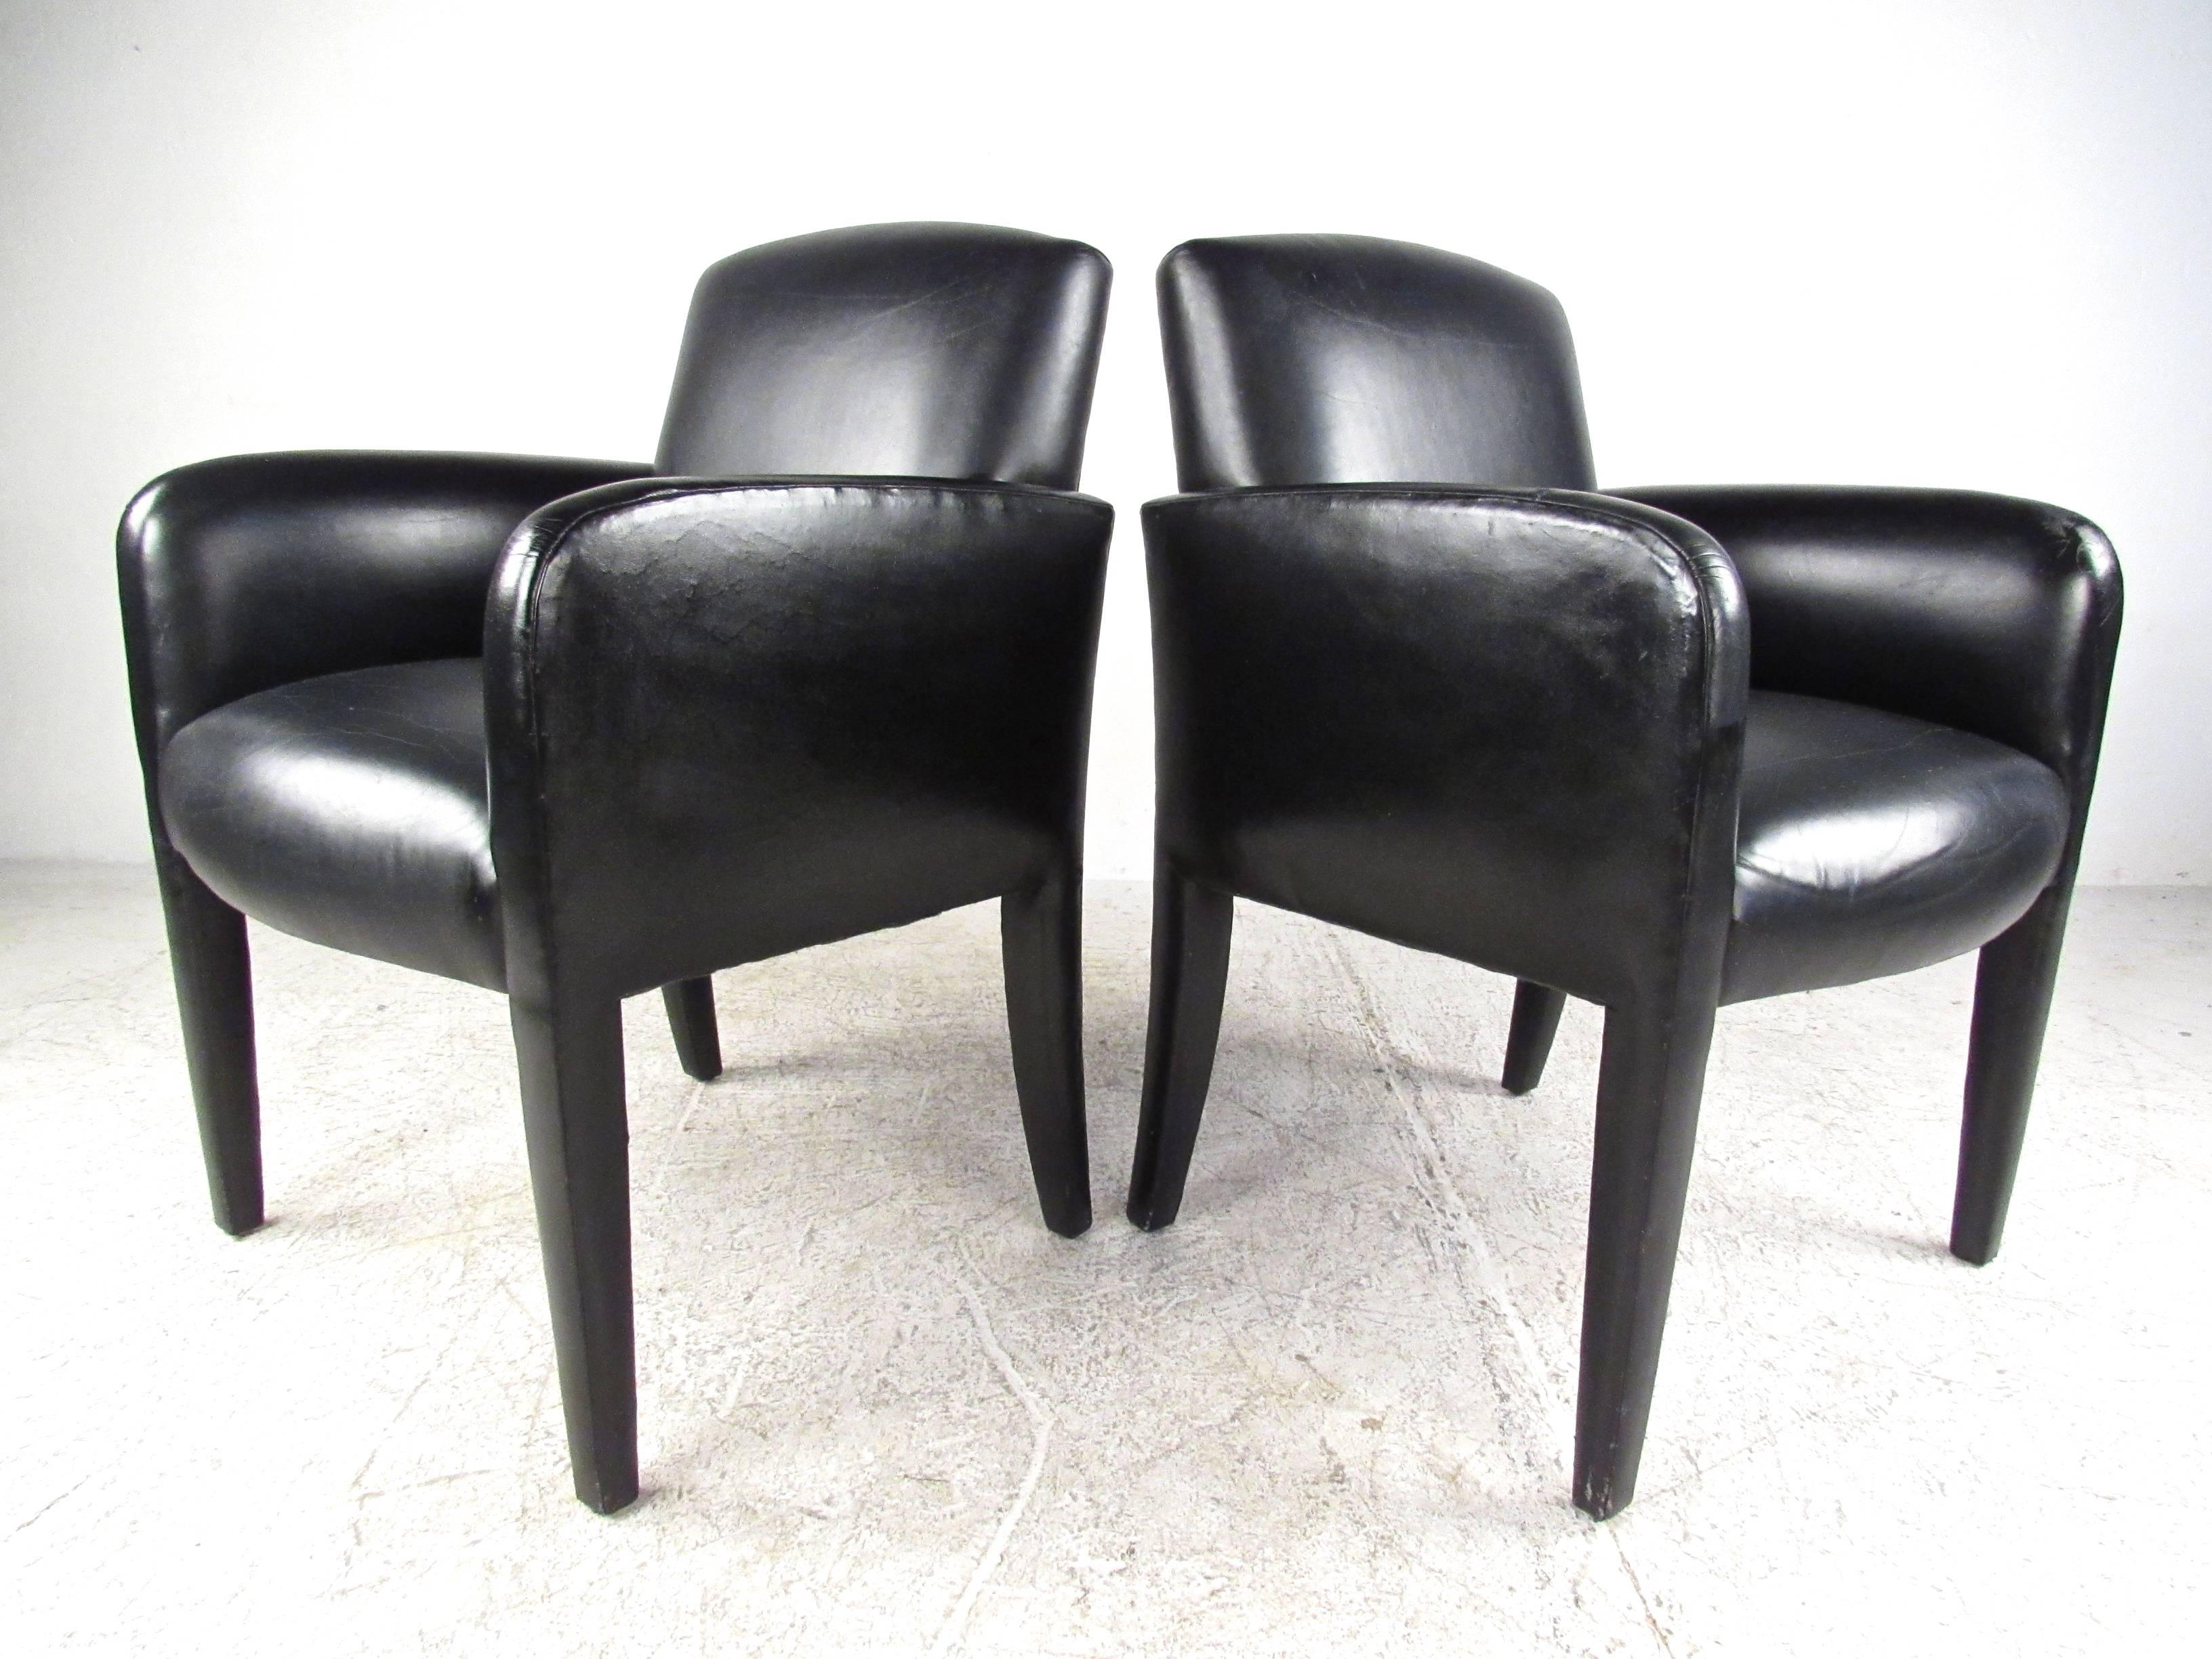 This attractive pair of modern Italian side chairs feature stylish leather upholstered frames and make a stunning addition to any seating area. An extremely comfortable lounge chair with thick padded seating. Perfect chairs for home or office use,